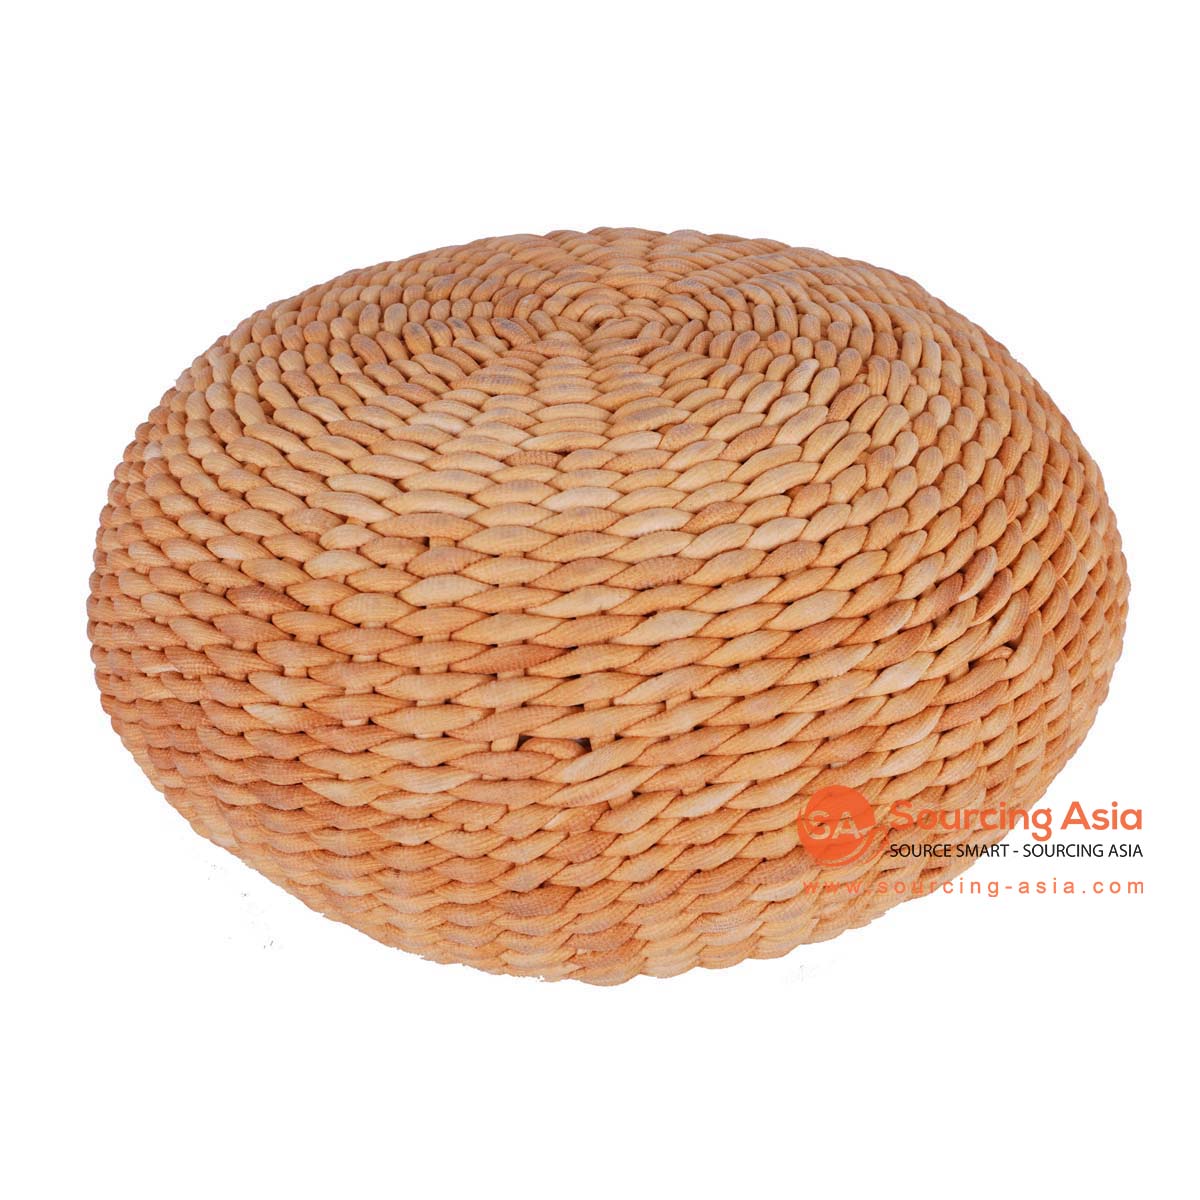 HBSC593 NATURAL WATER HYACINTH ROUND FOOT POUFFE